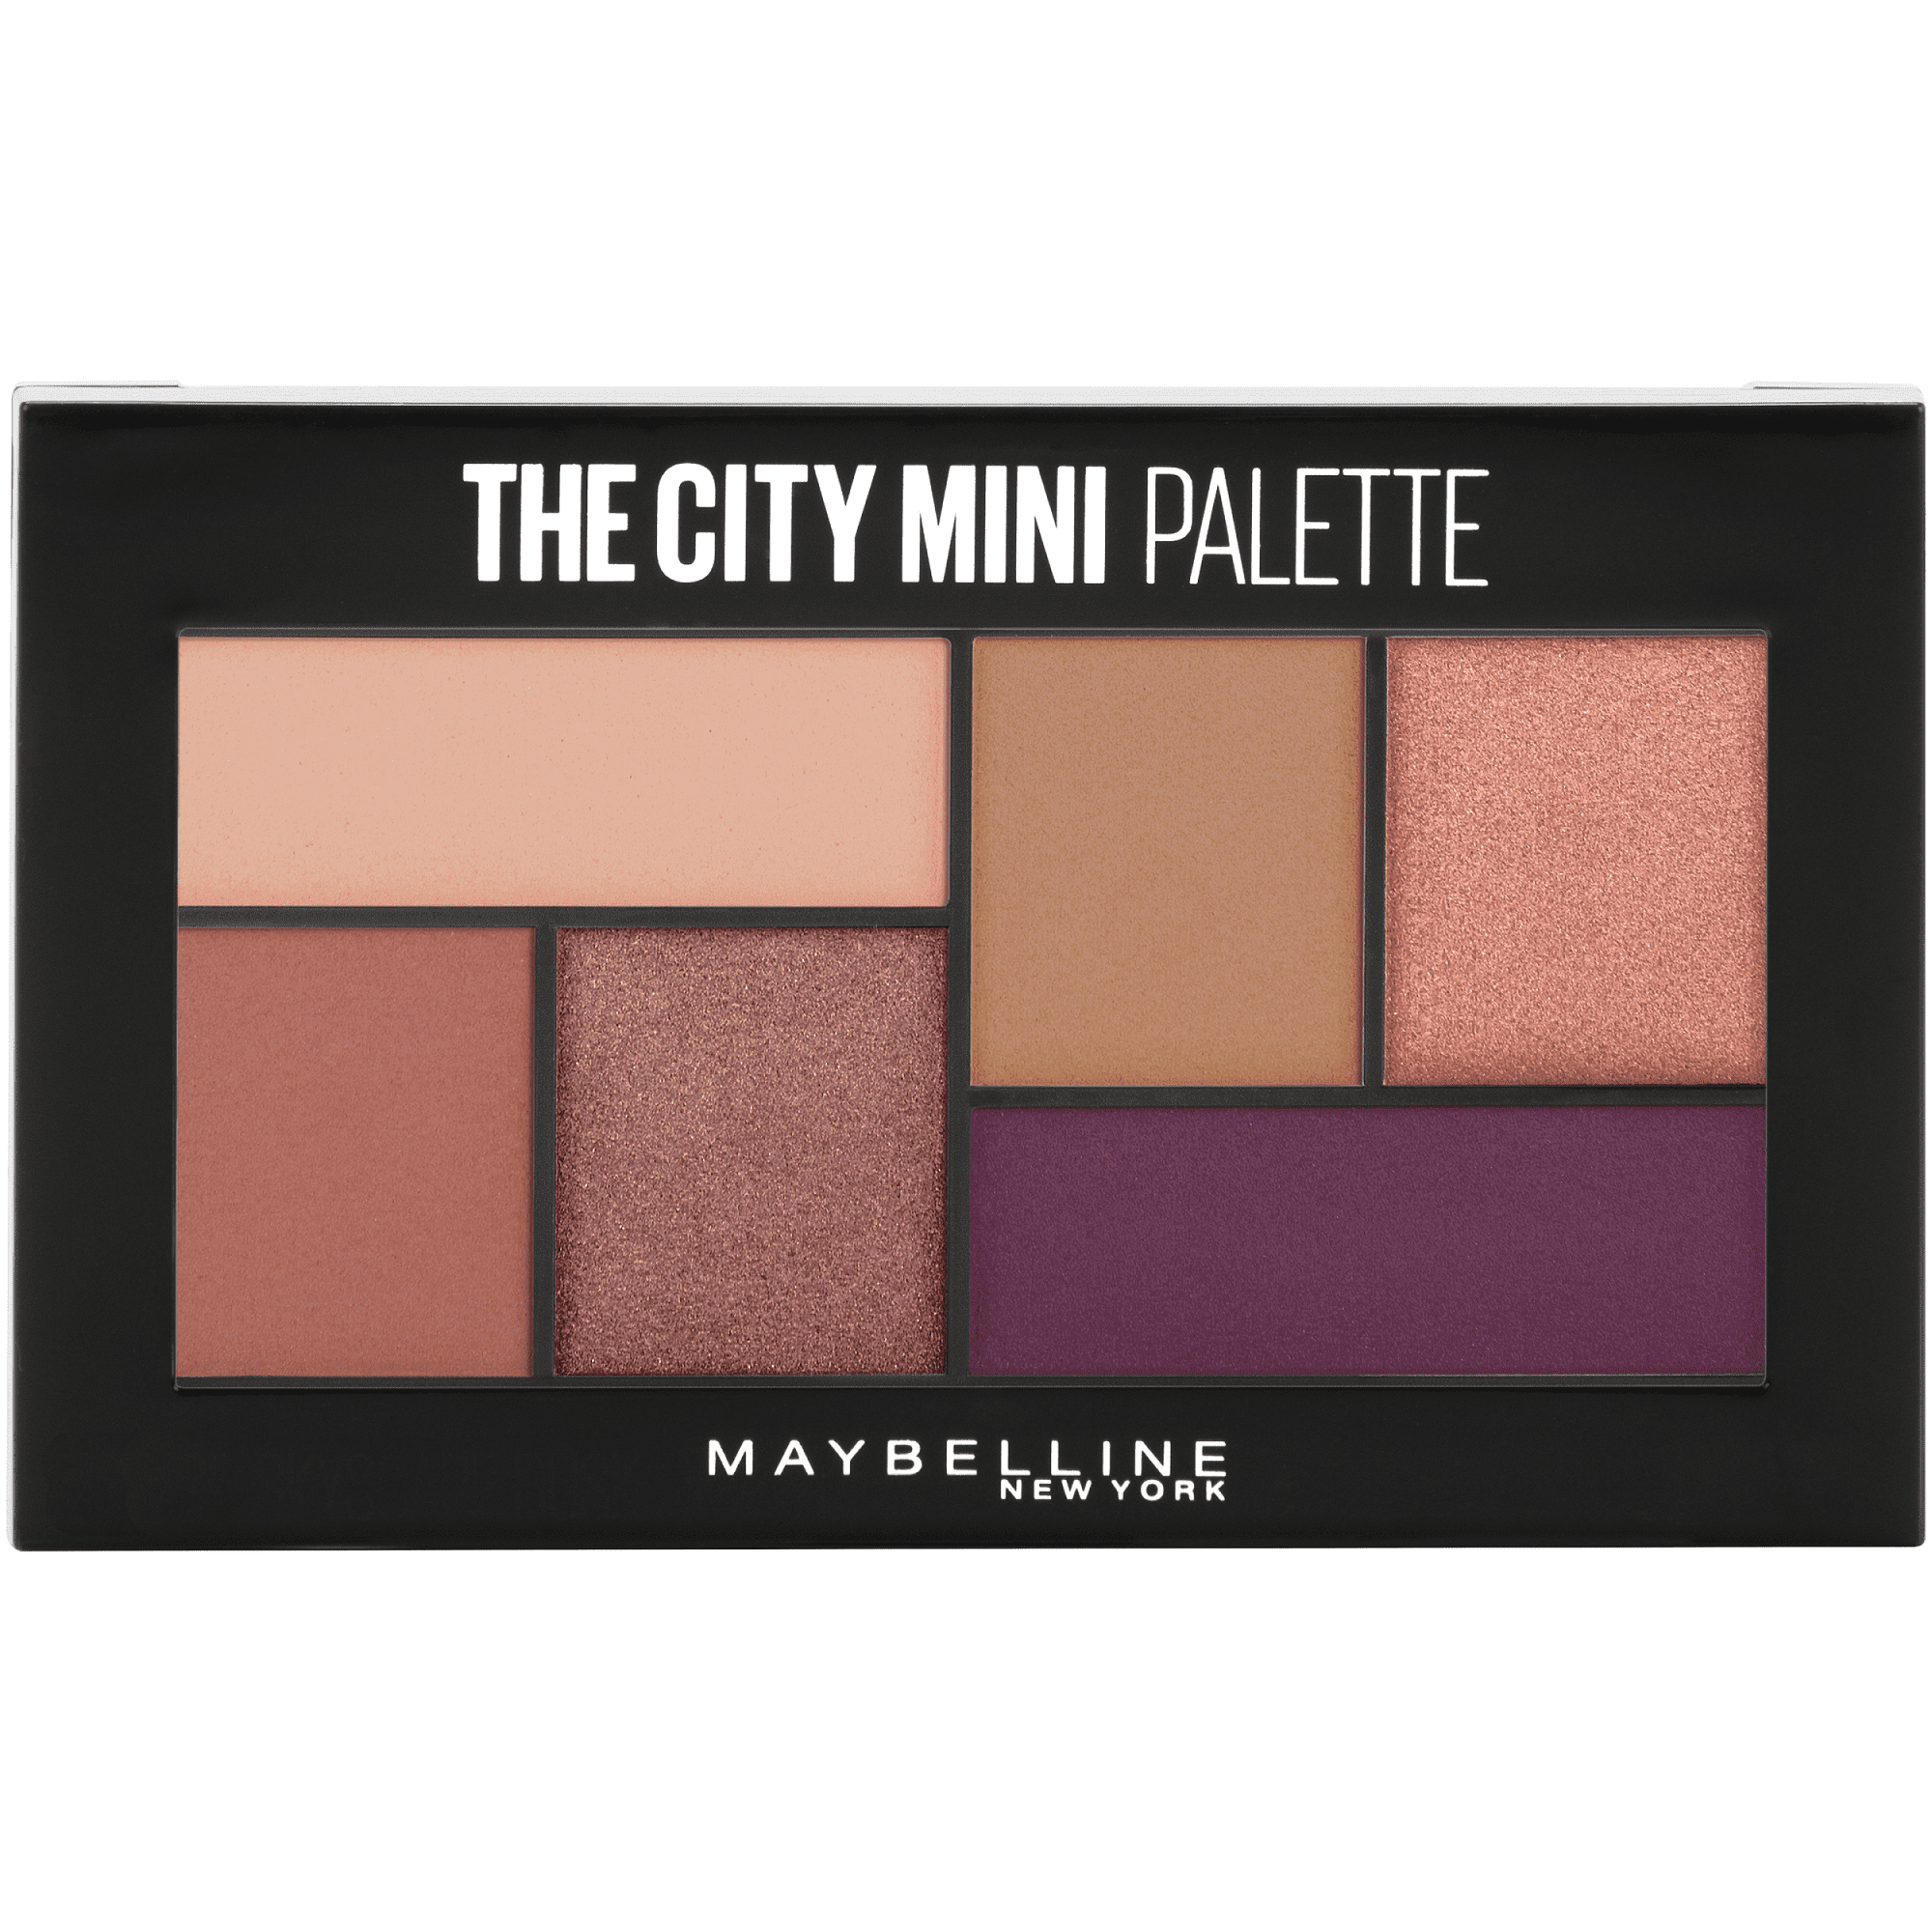 Maybelline The City Mini Makeup, Avenue Palette Blushed Eyeshadow